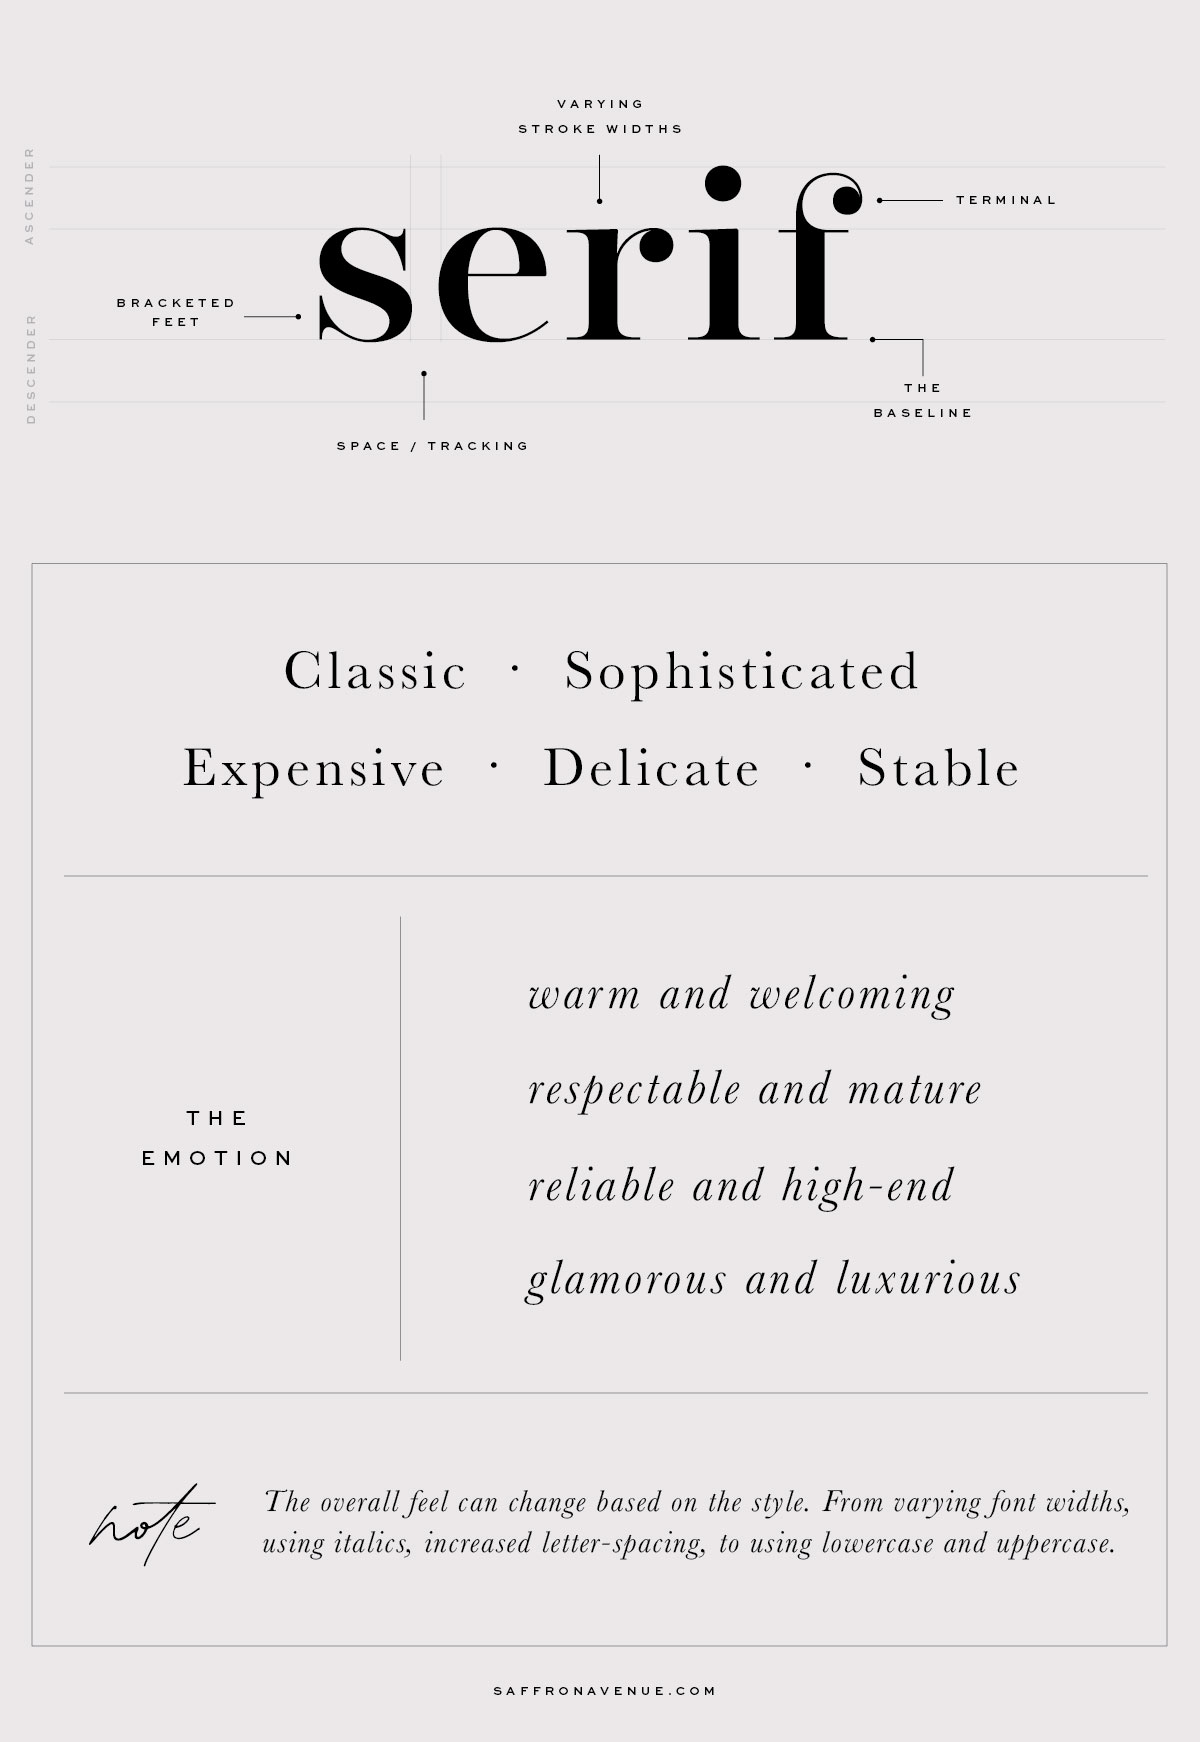 Choose Fonts That Reflect Your Brand Style and Font Psychology